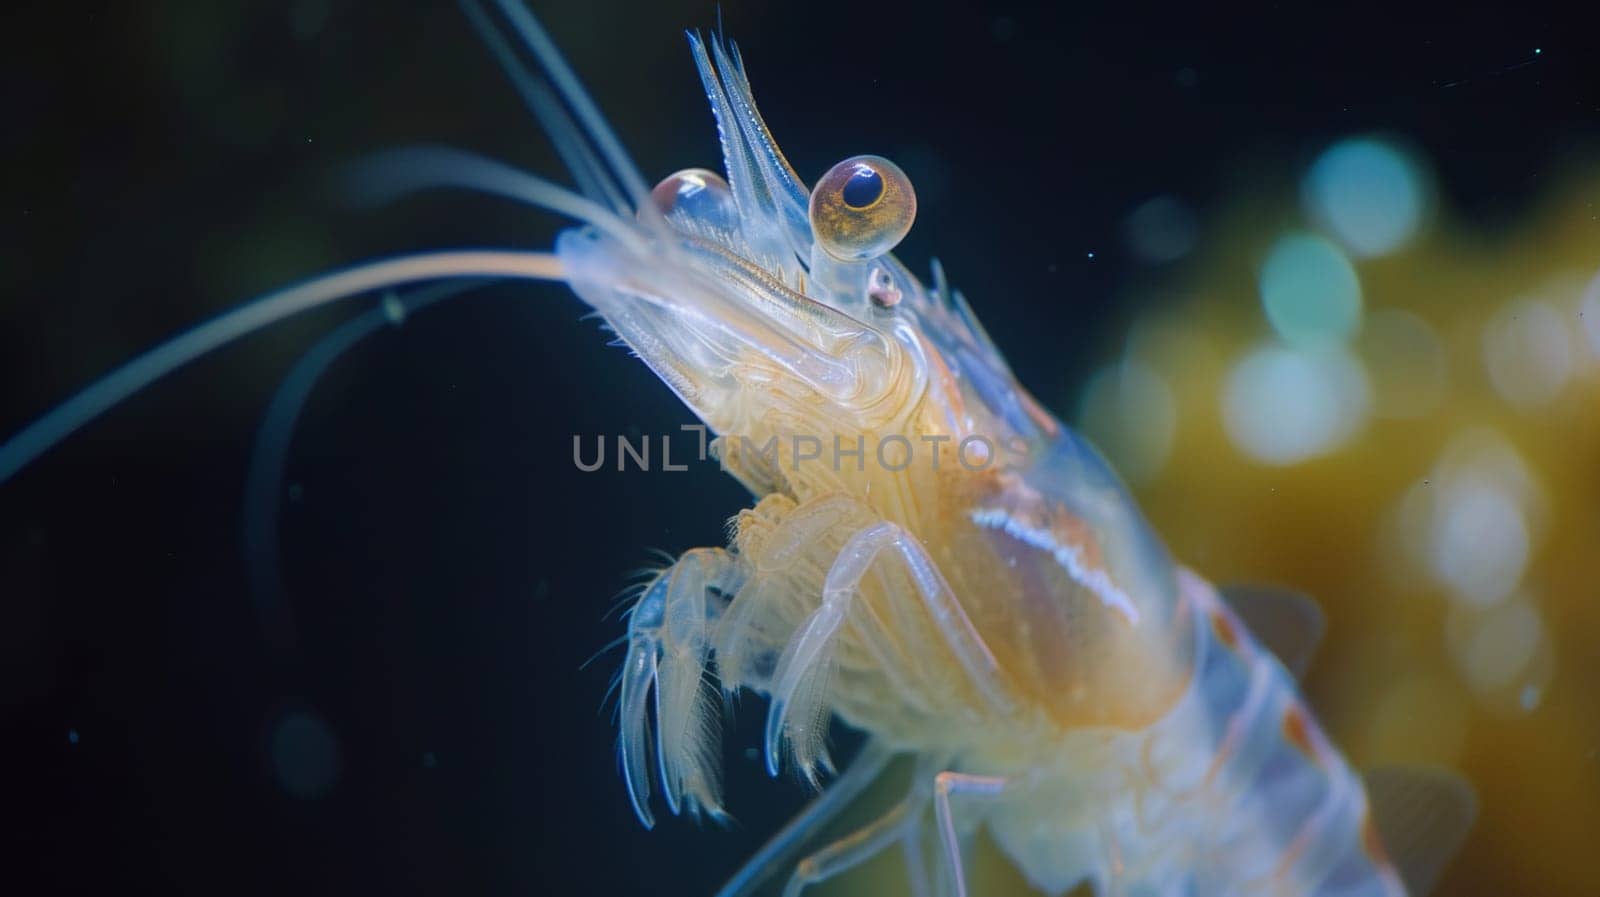 A close up of a shrimp with long legs and eyes